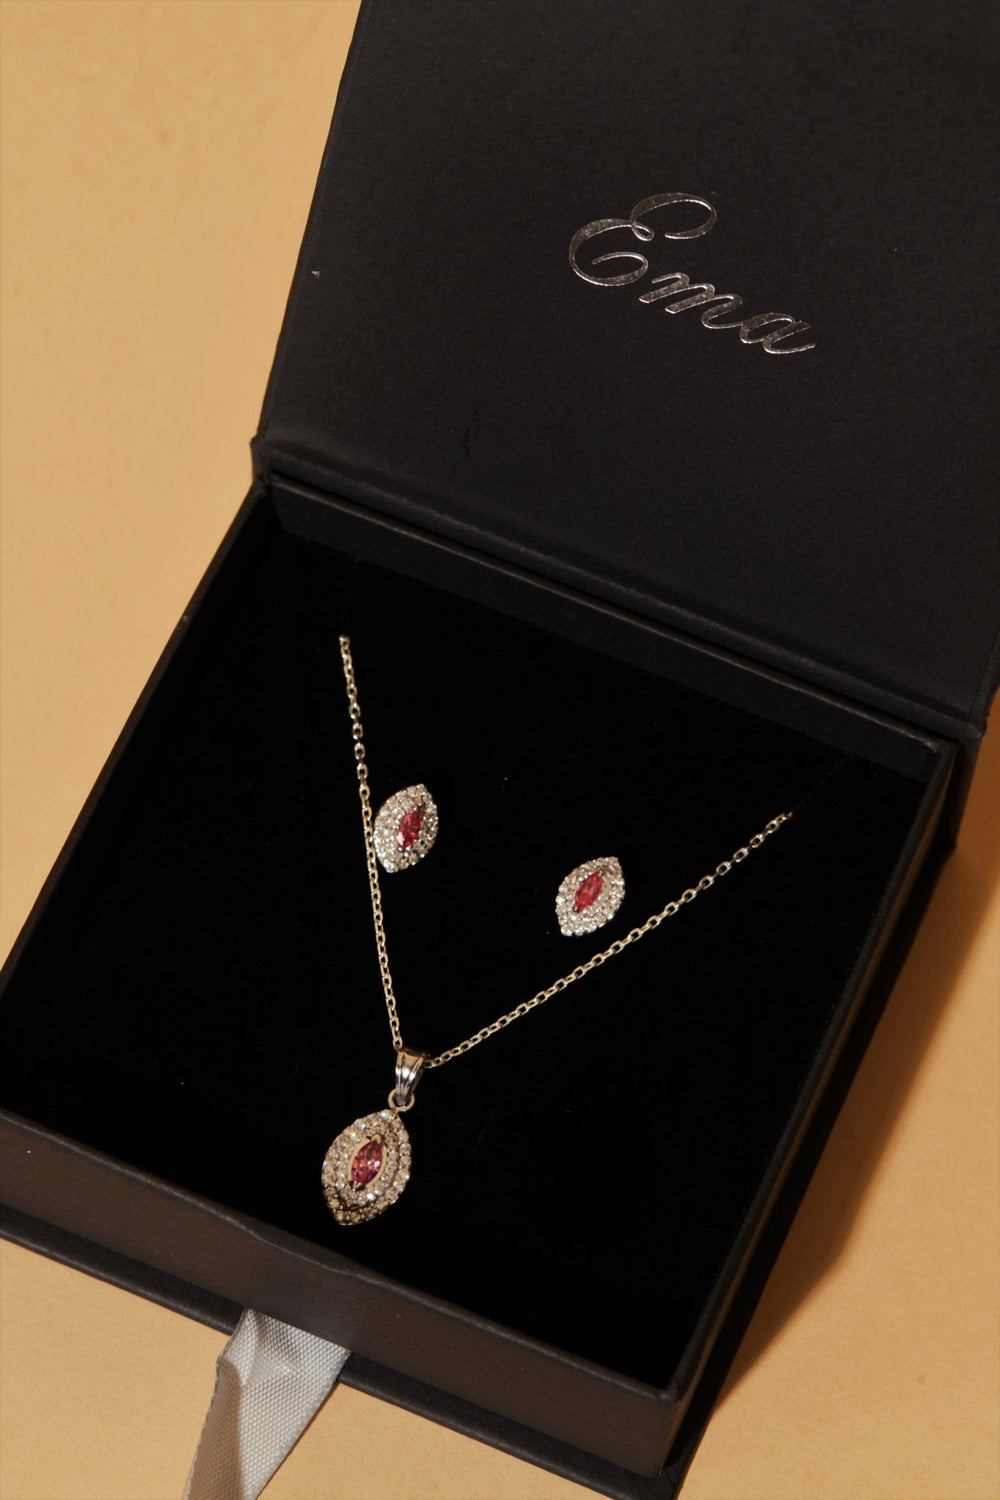 Hecate Rosalie Sterling Silver Necklace and Earrings SET - Ema Jewels